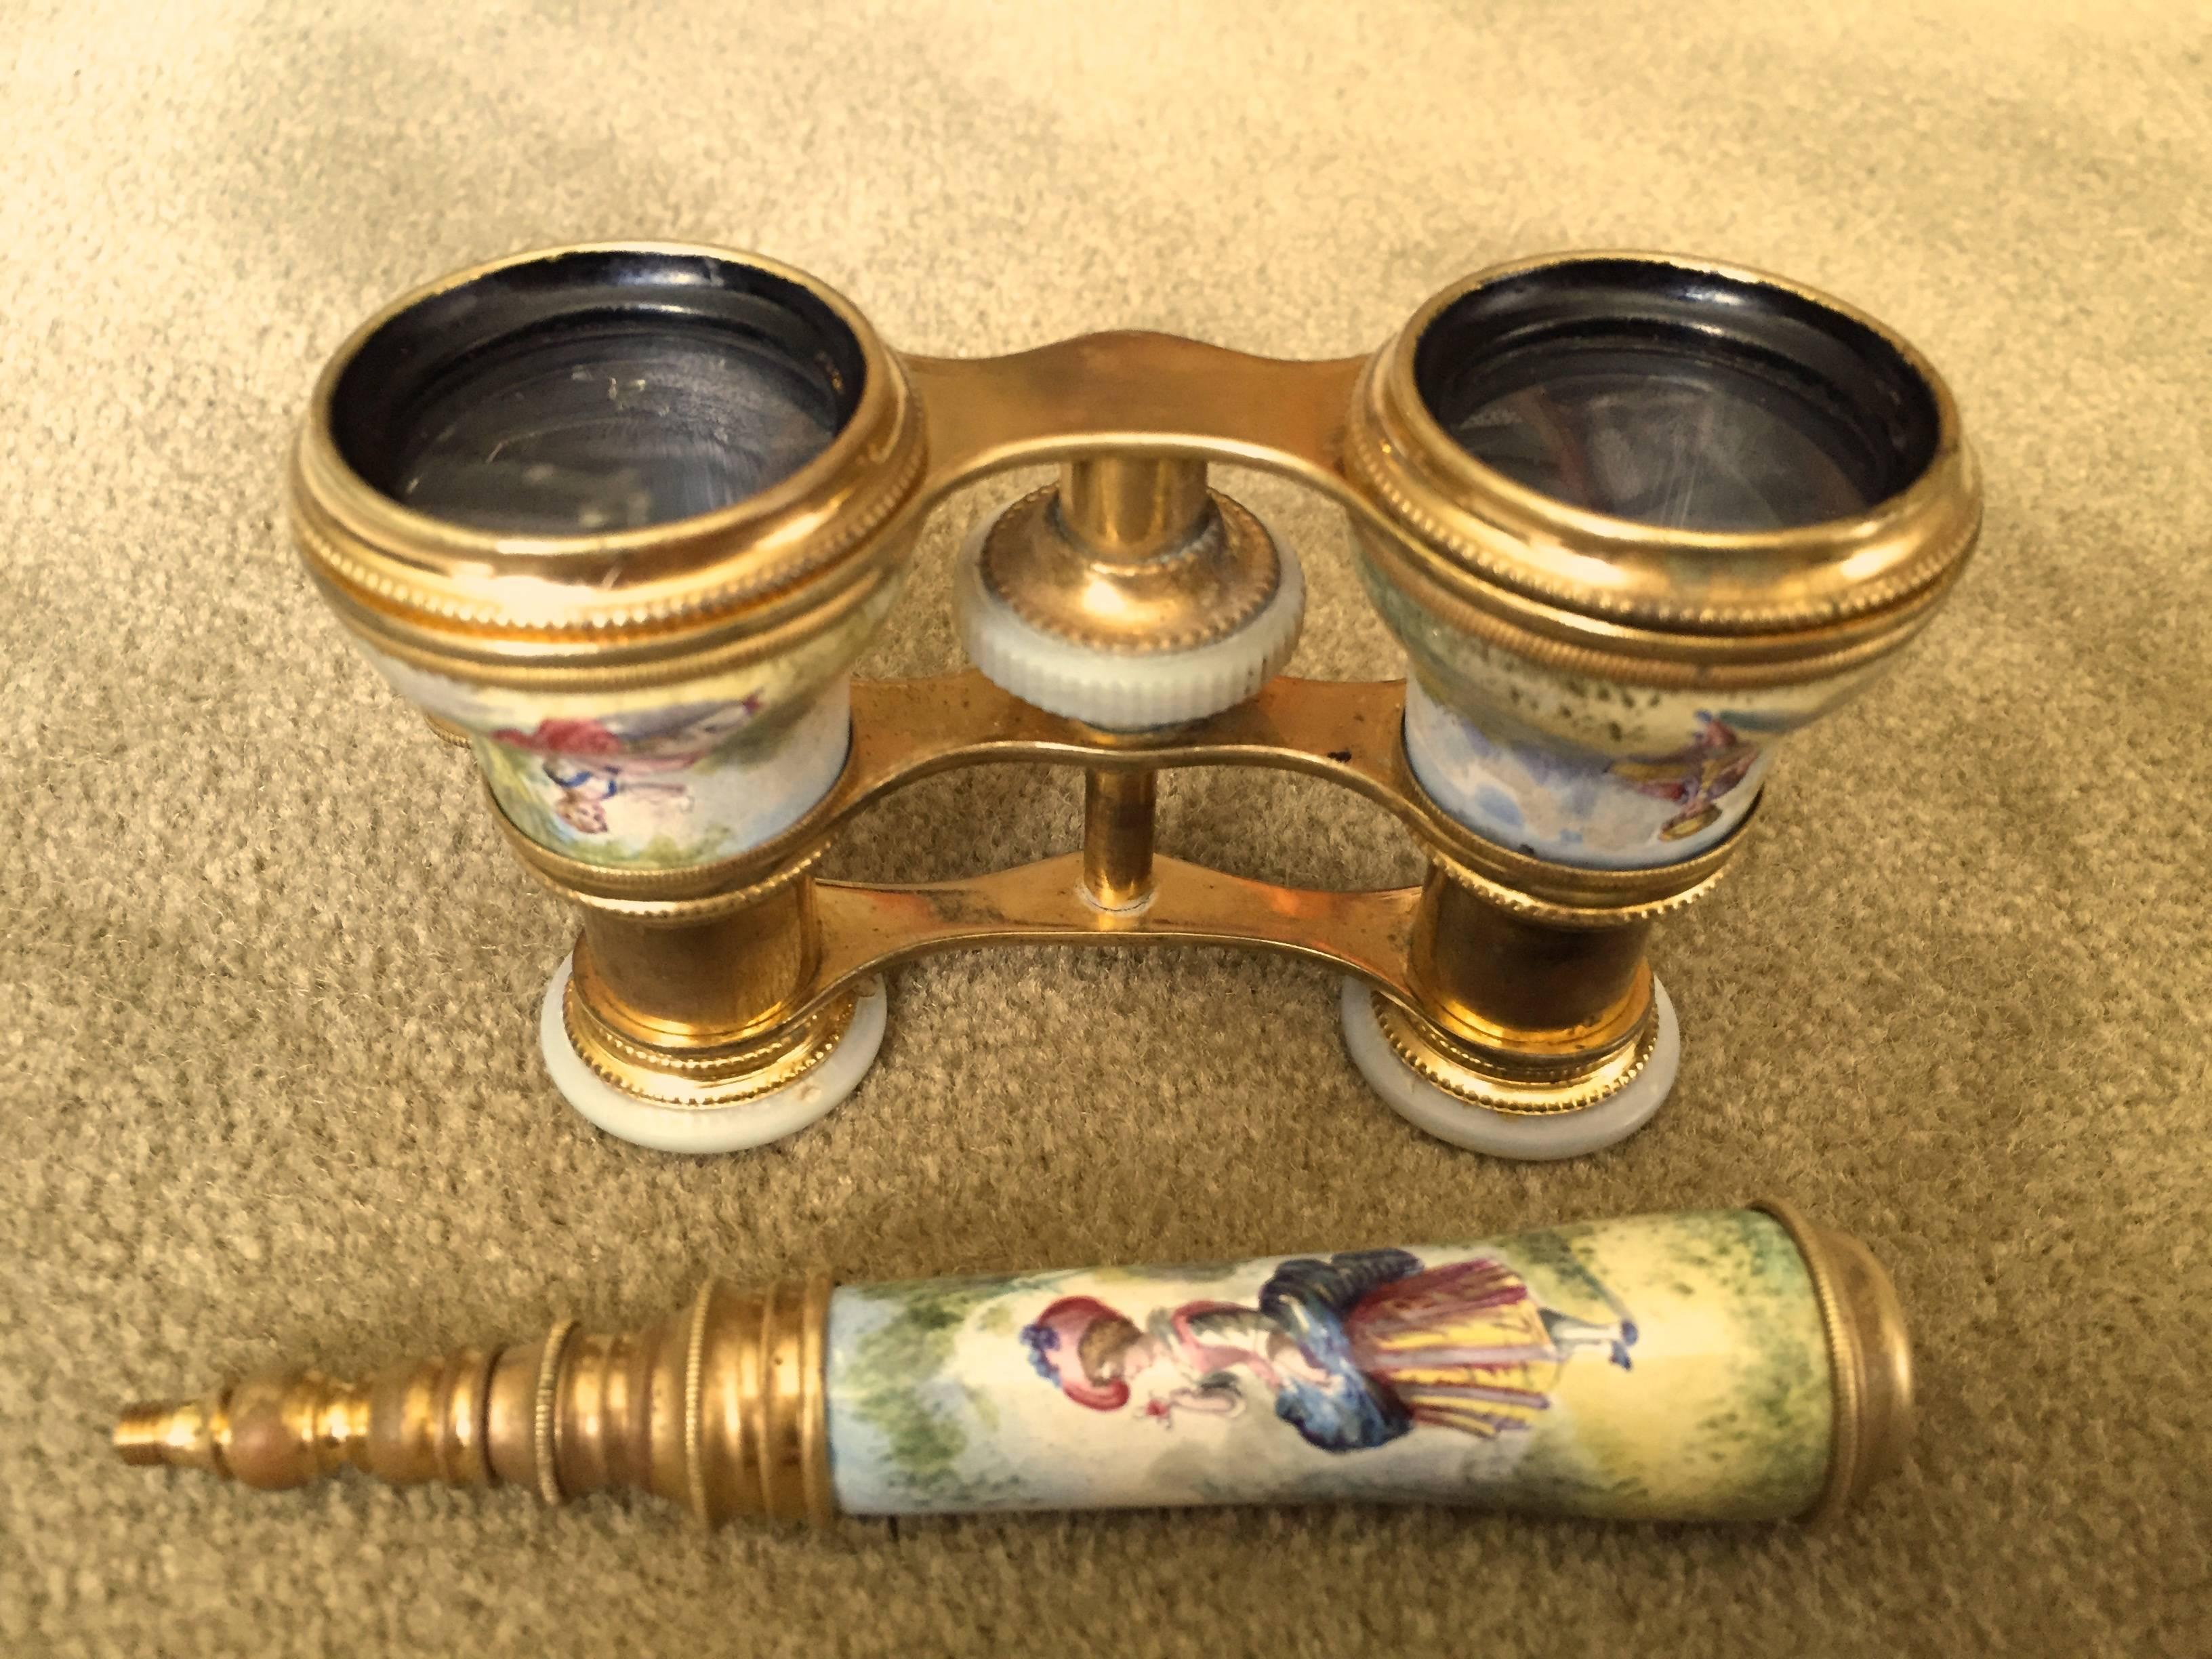 French Enamel Opera Glasses Courtship Scenes Hand-Painted, circa 1880, Paris For Sale 3